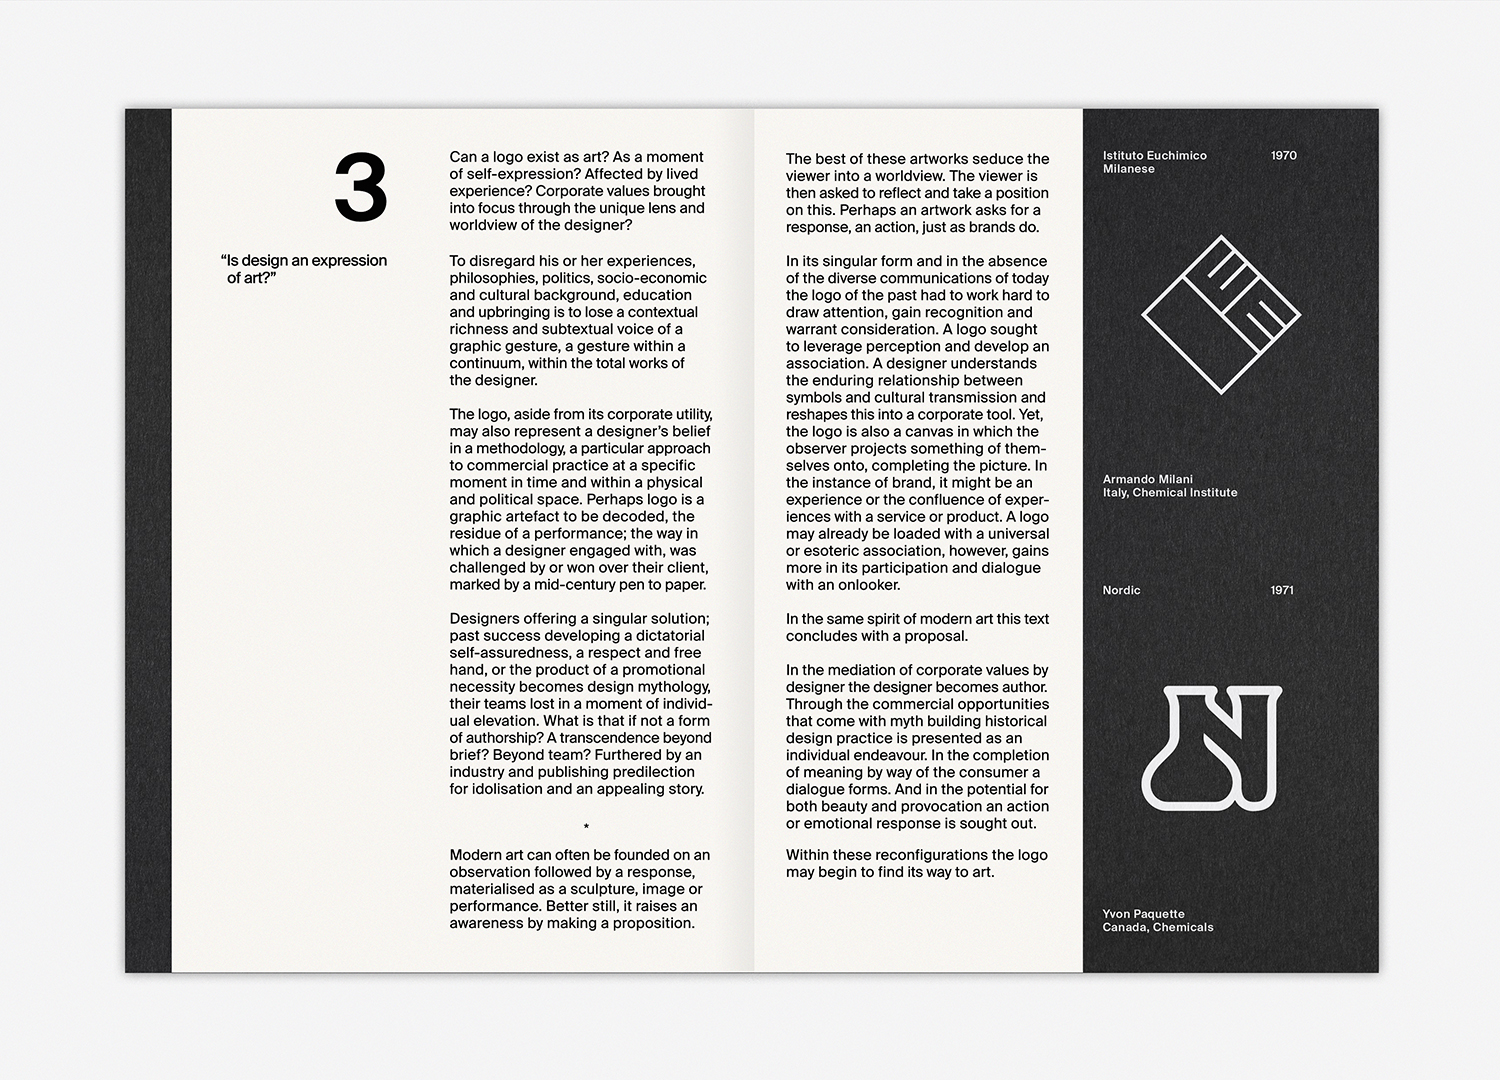 LogoArchive Issue 3 designed and edited by Richard Baird, published by BP&O